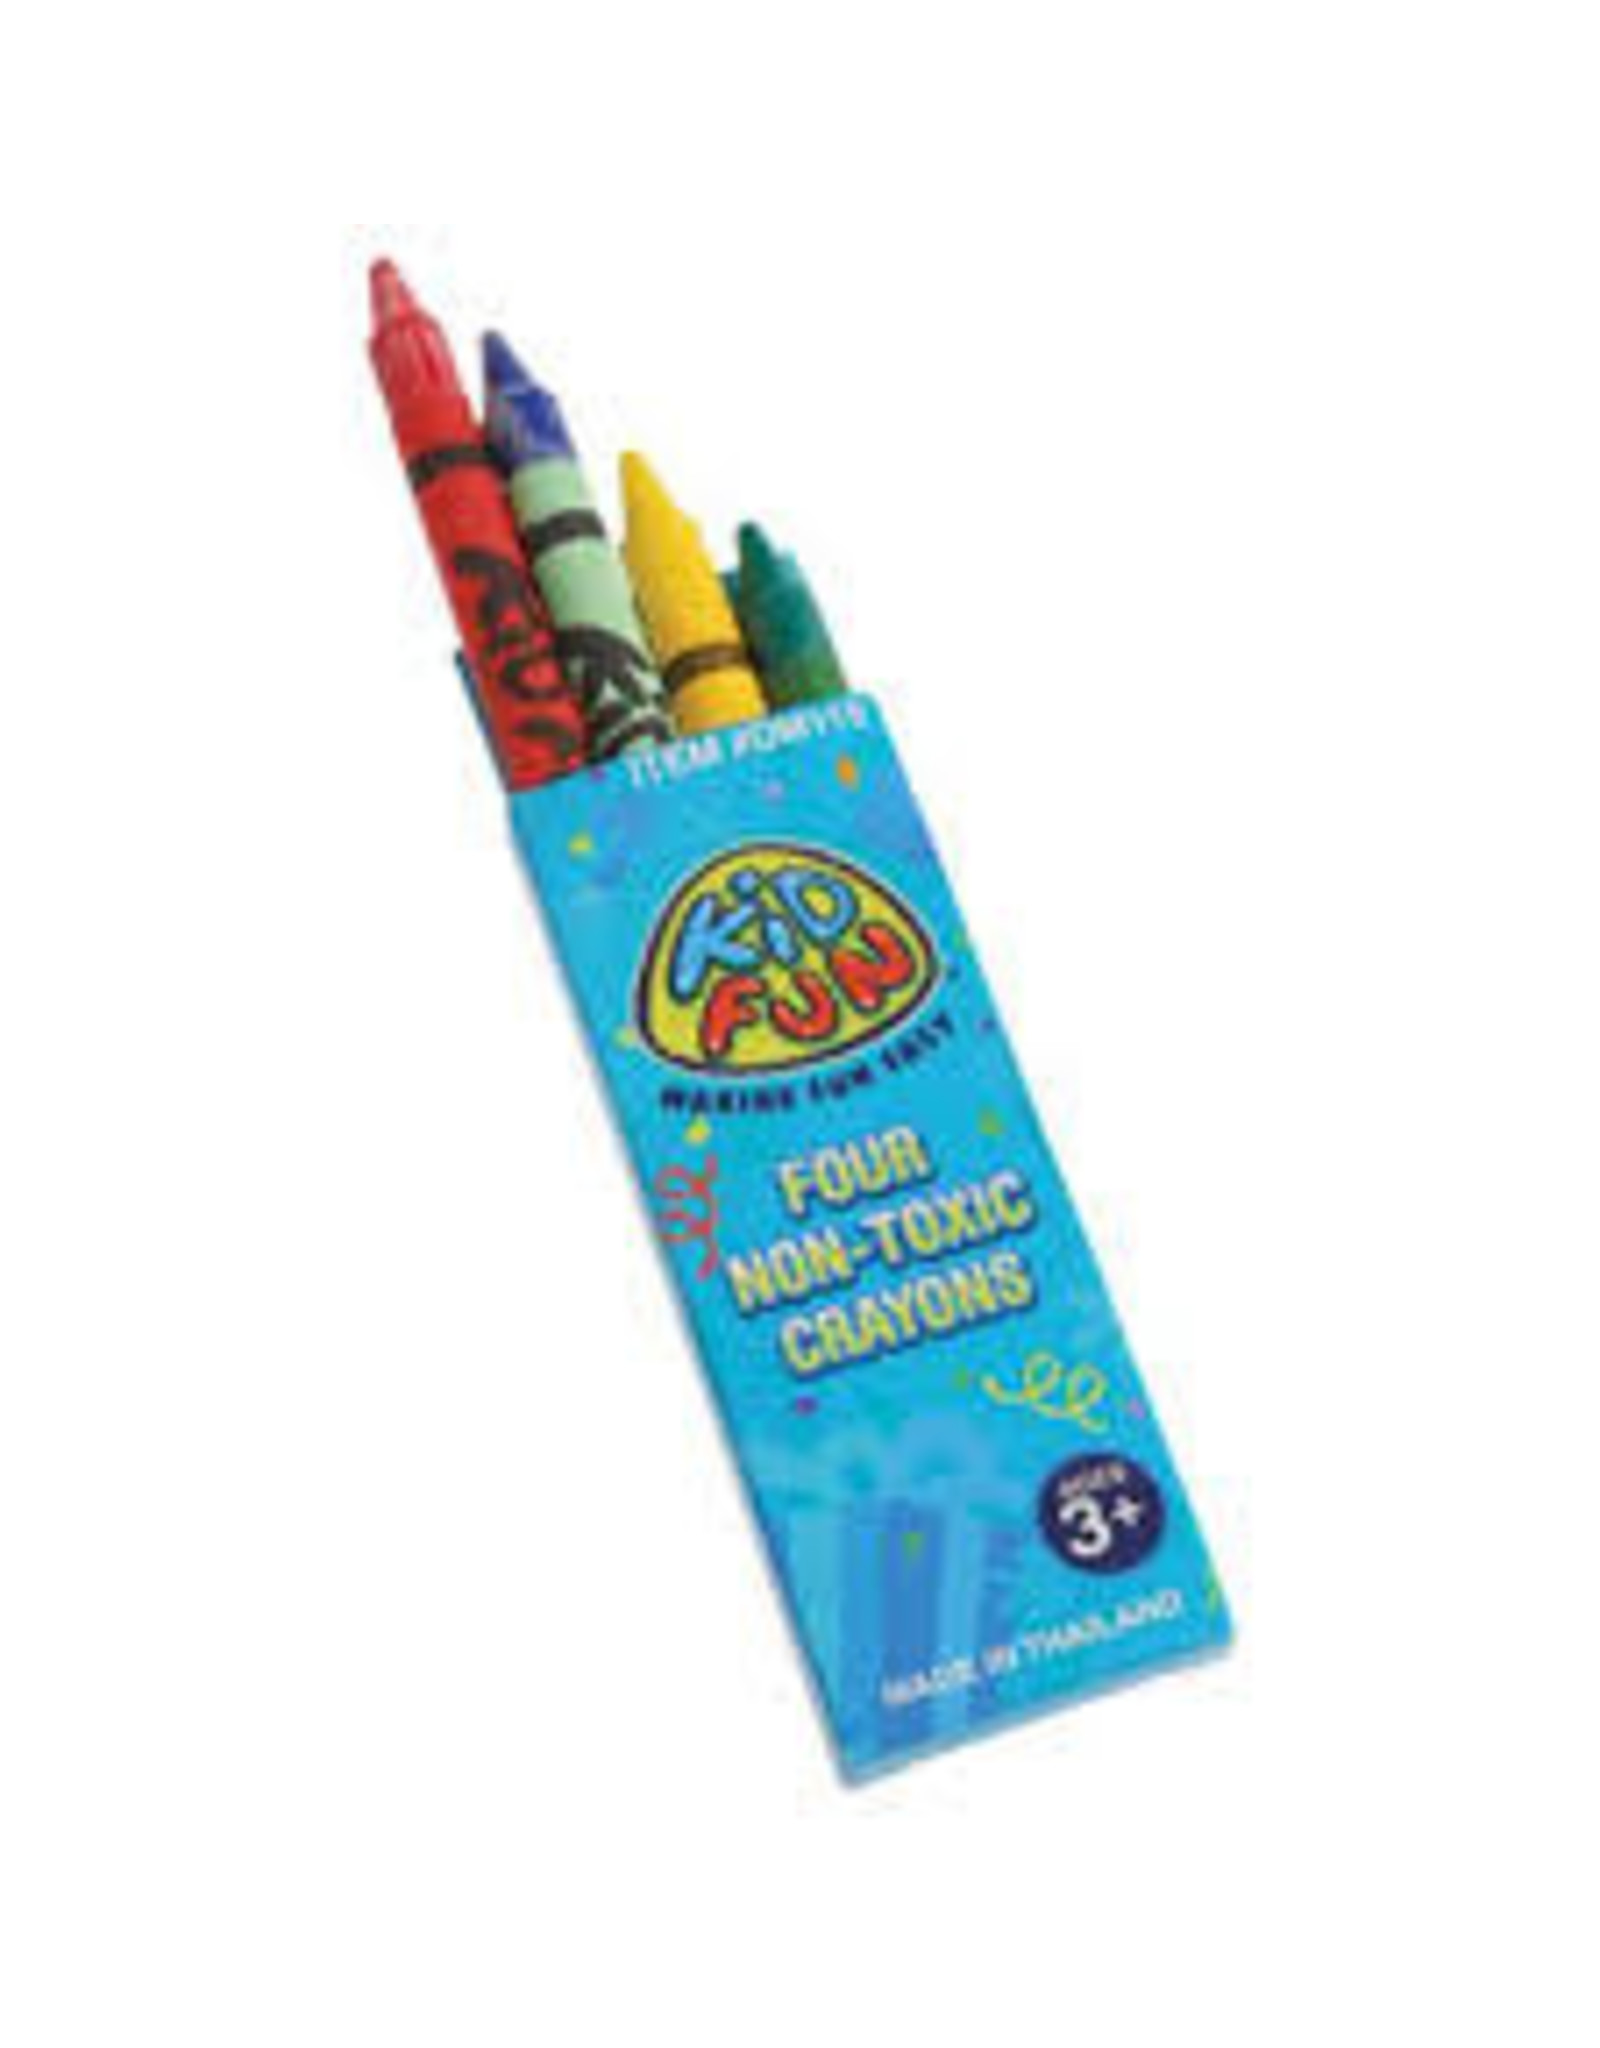 Four Pack Mini Crayons